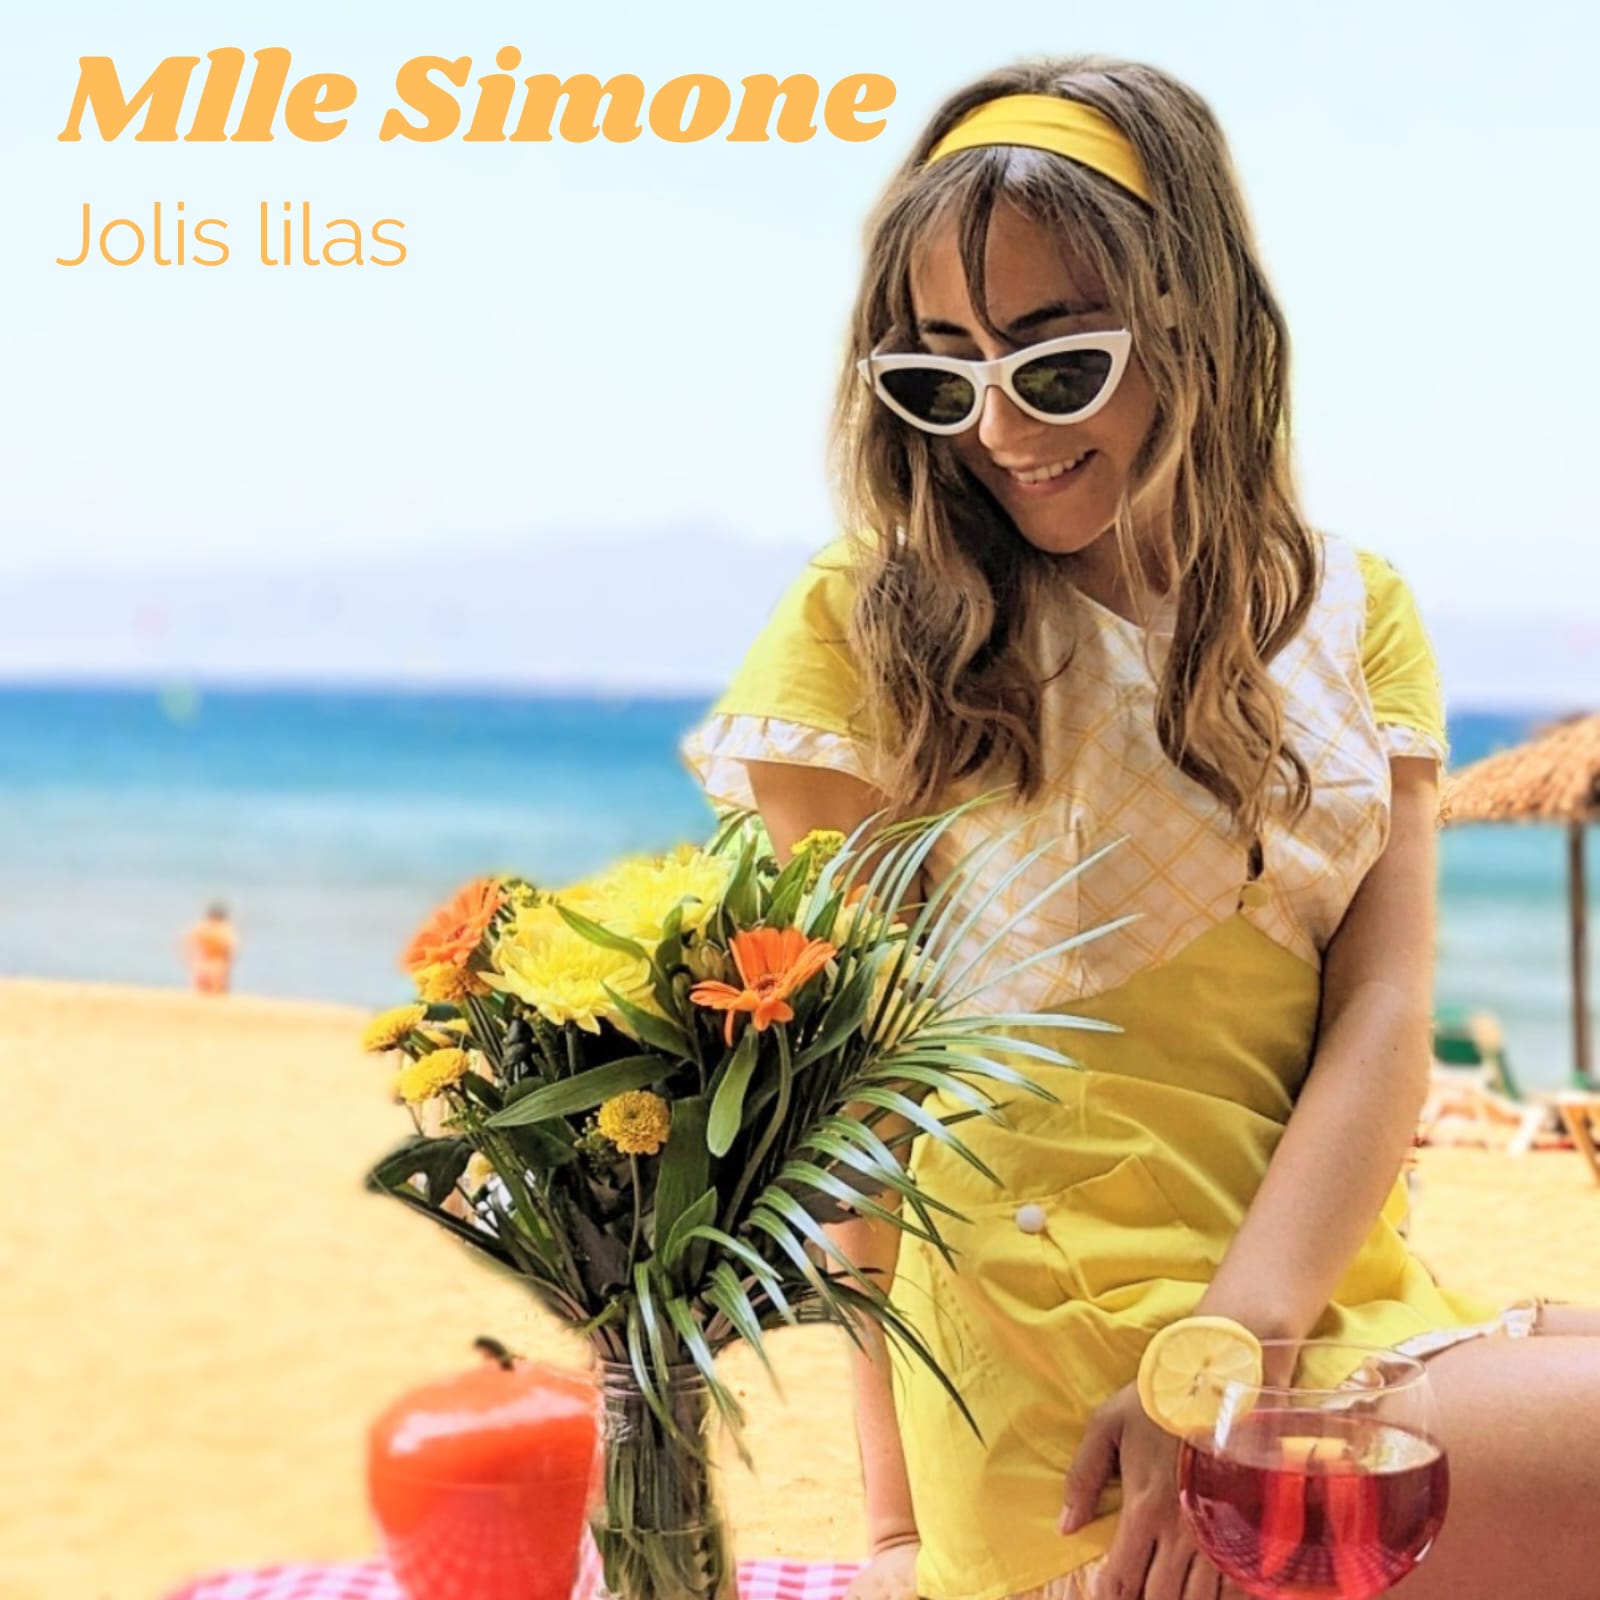 Jolis Lilas by Mlle Simone, produced by composer Arron Storey